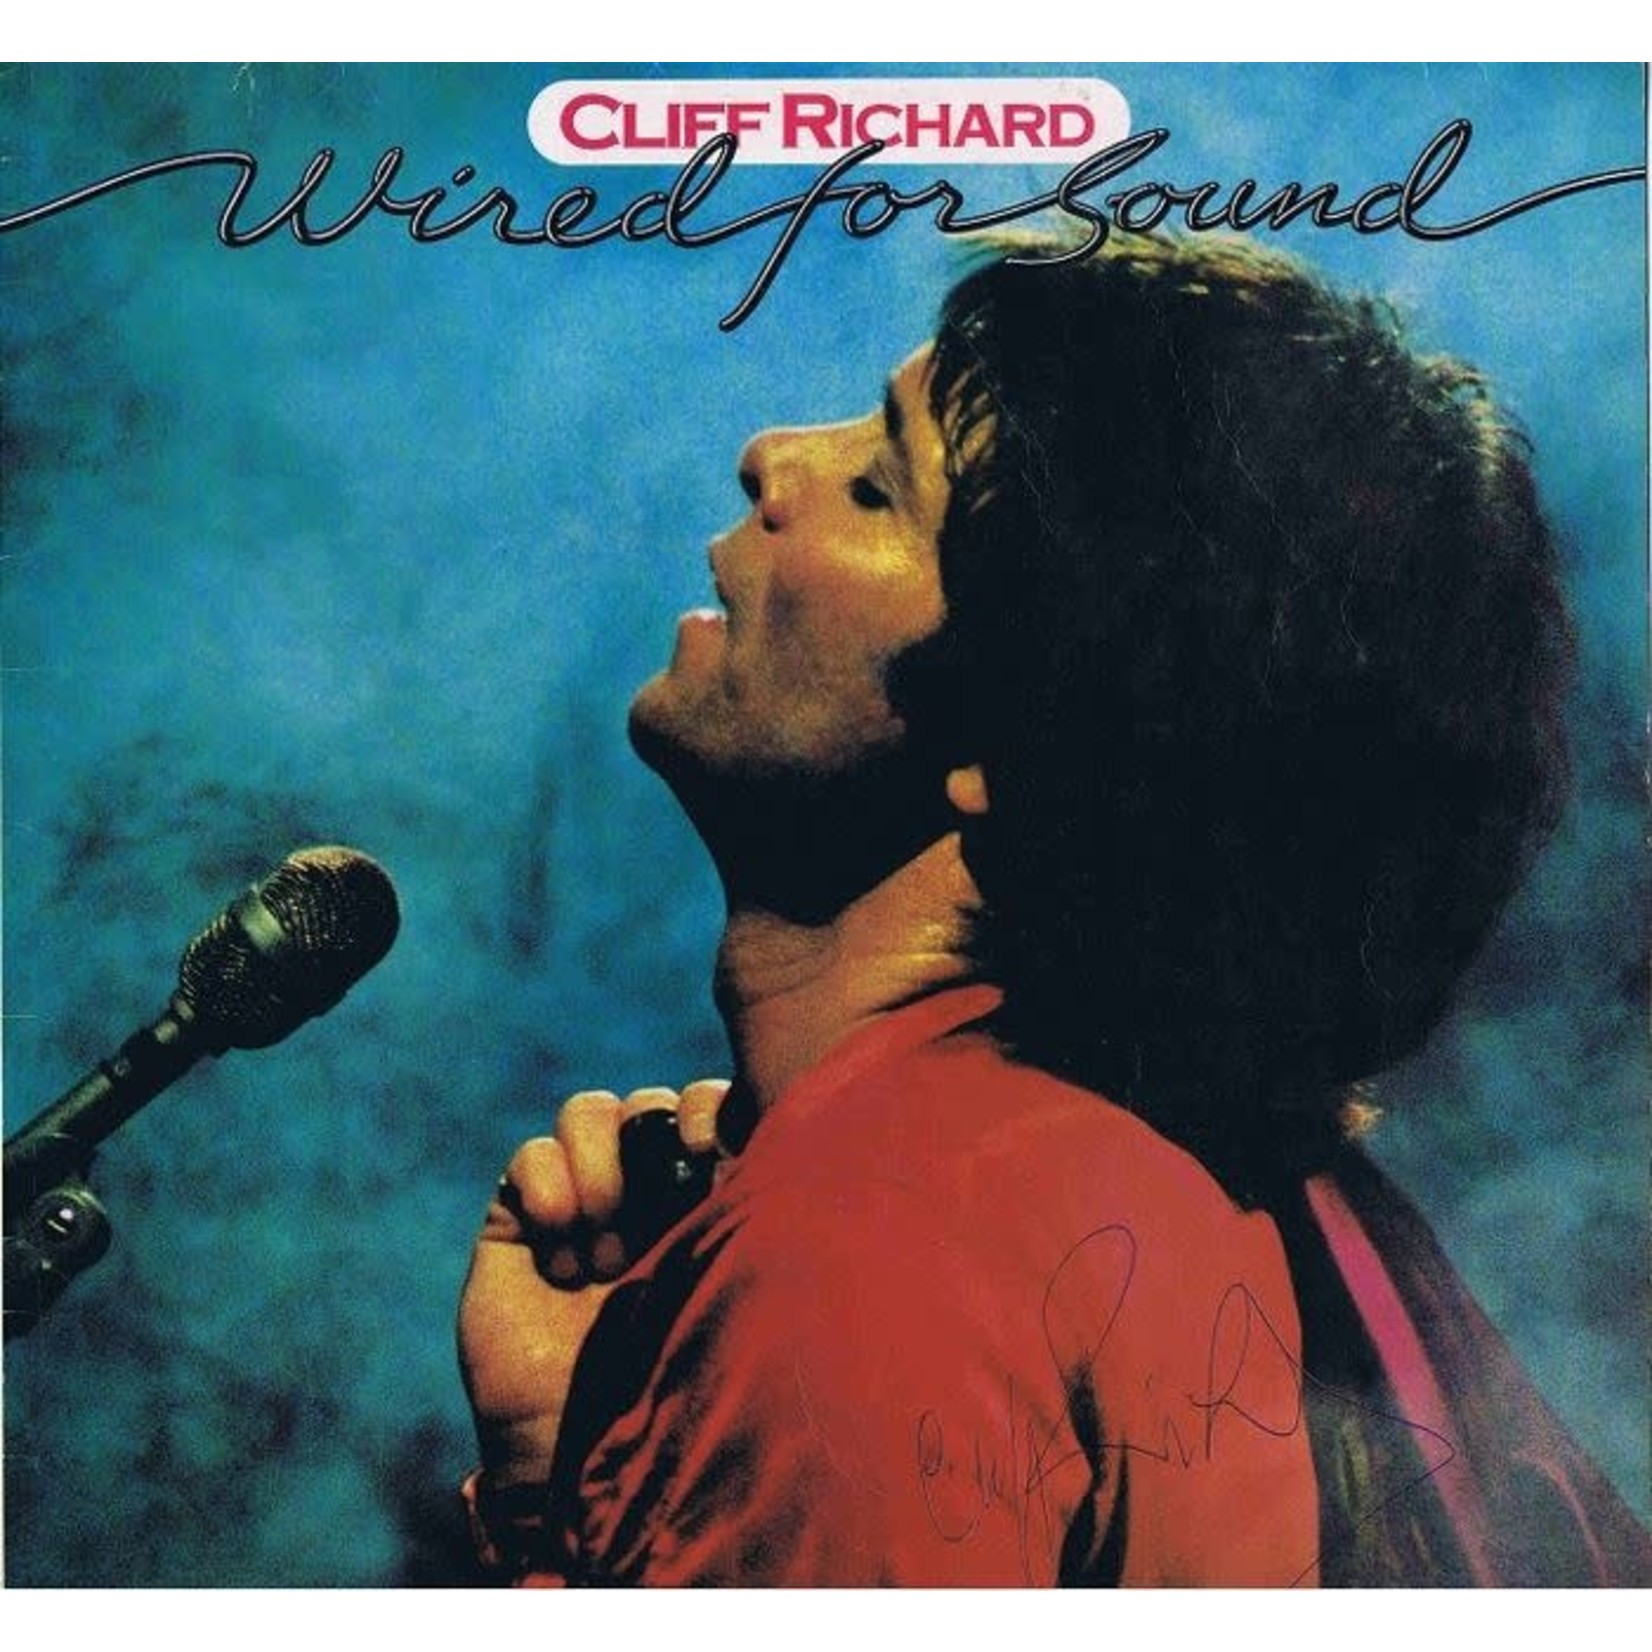 [Vintage] Cliff Richard - Wired for Sound